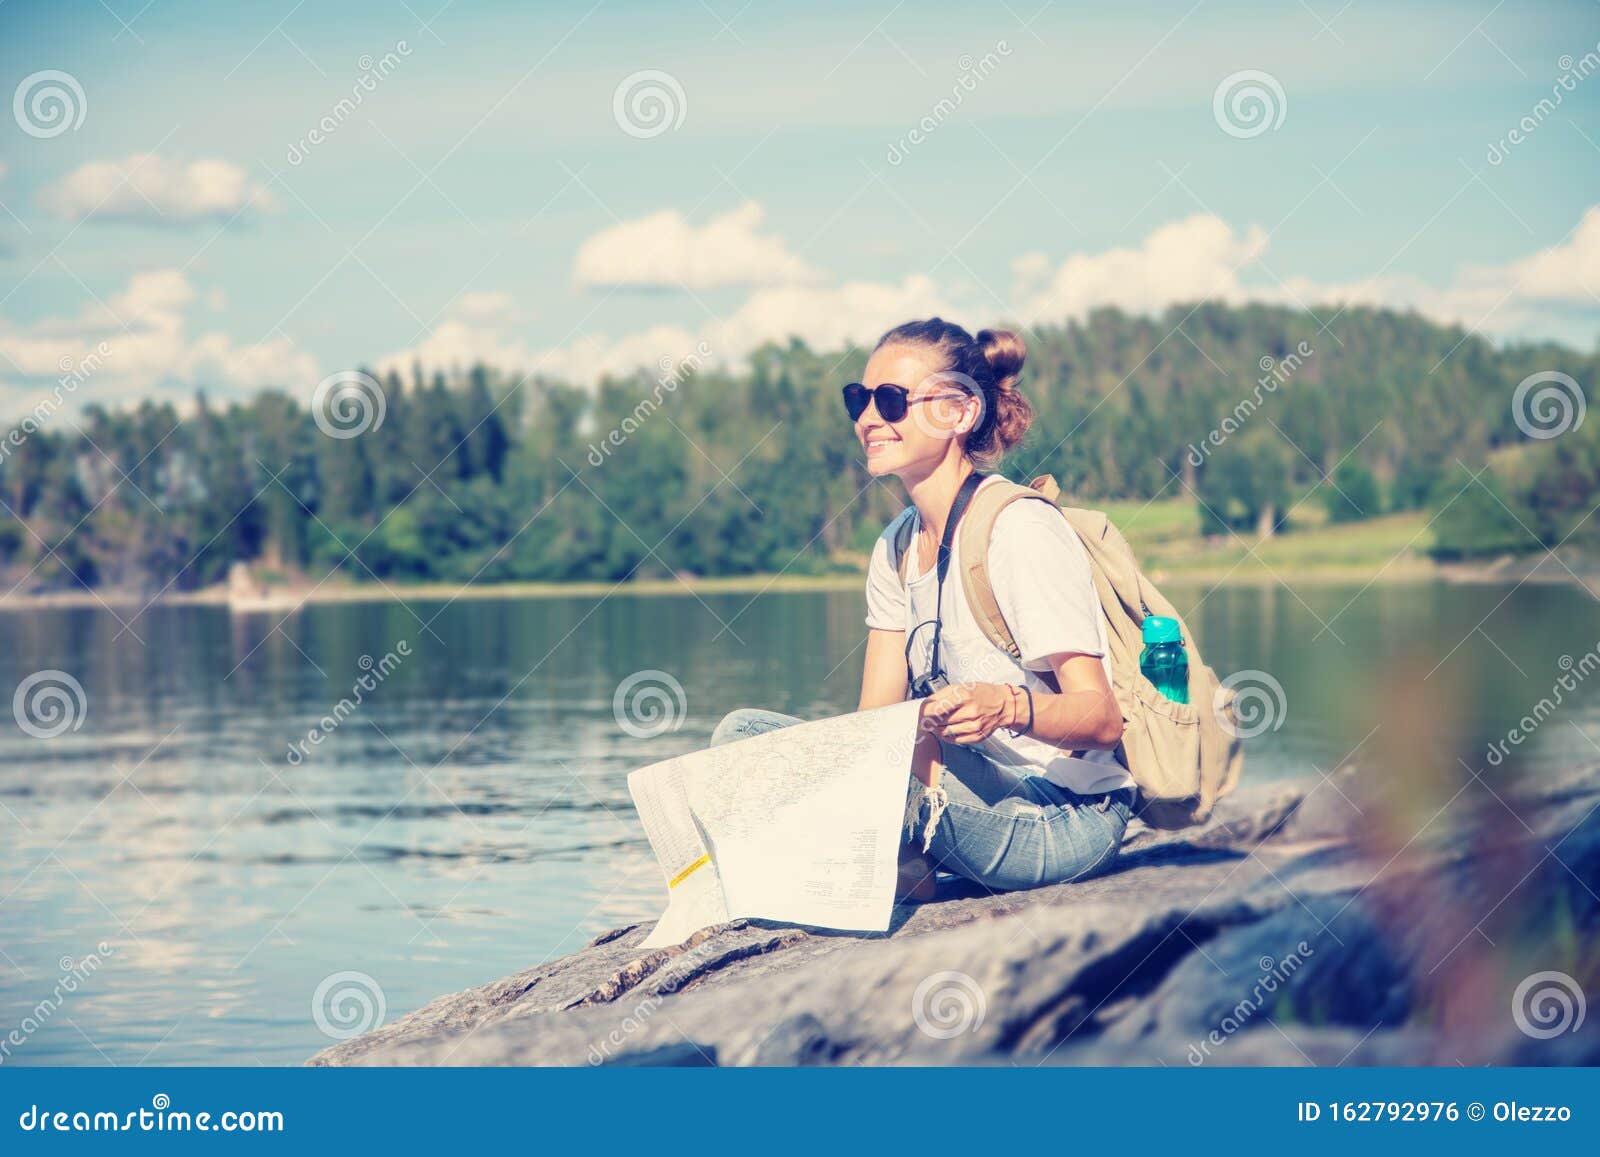 https://thumbs.dreamstime.com/z/young-beautiful-woman-traveler-map-hands-sits-lake-norway-young-beautiful-woman-traveler-map-hands-162792976.jpg